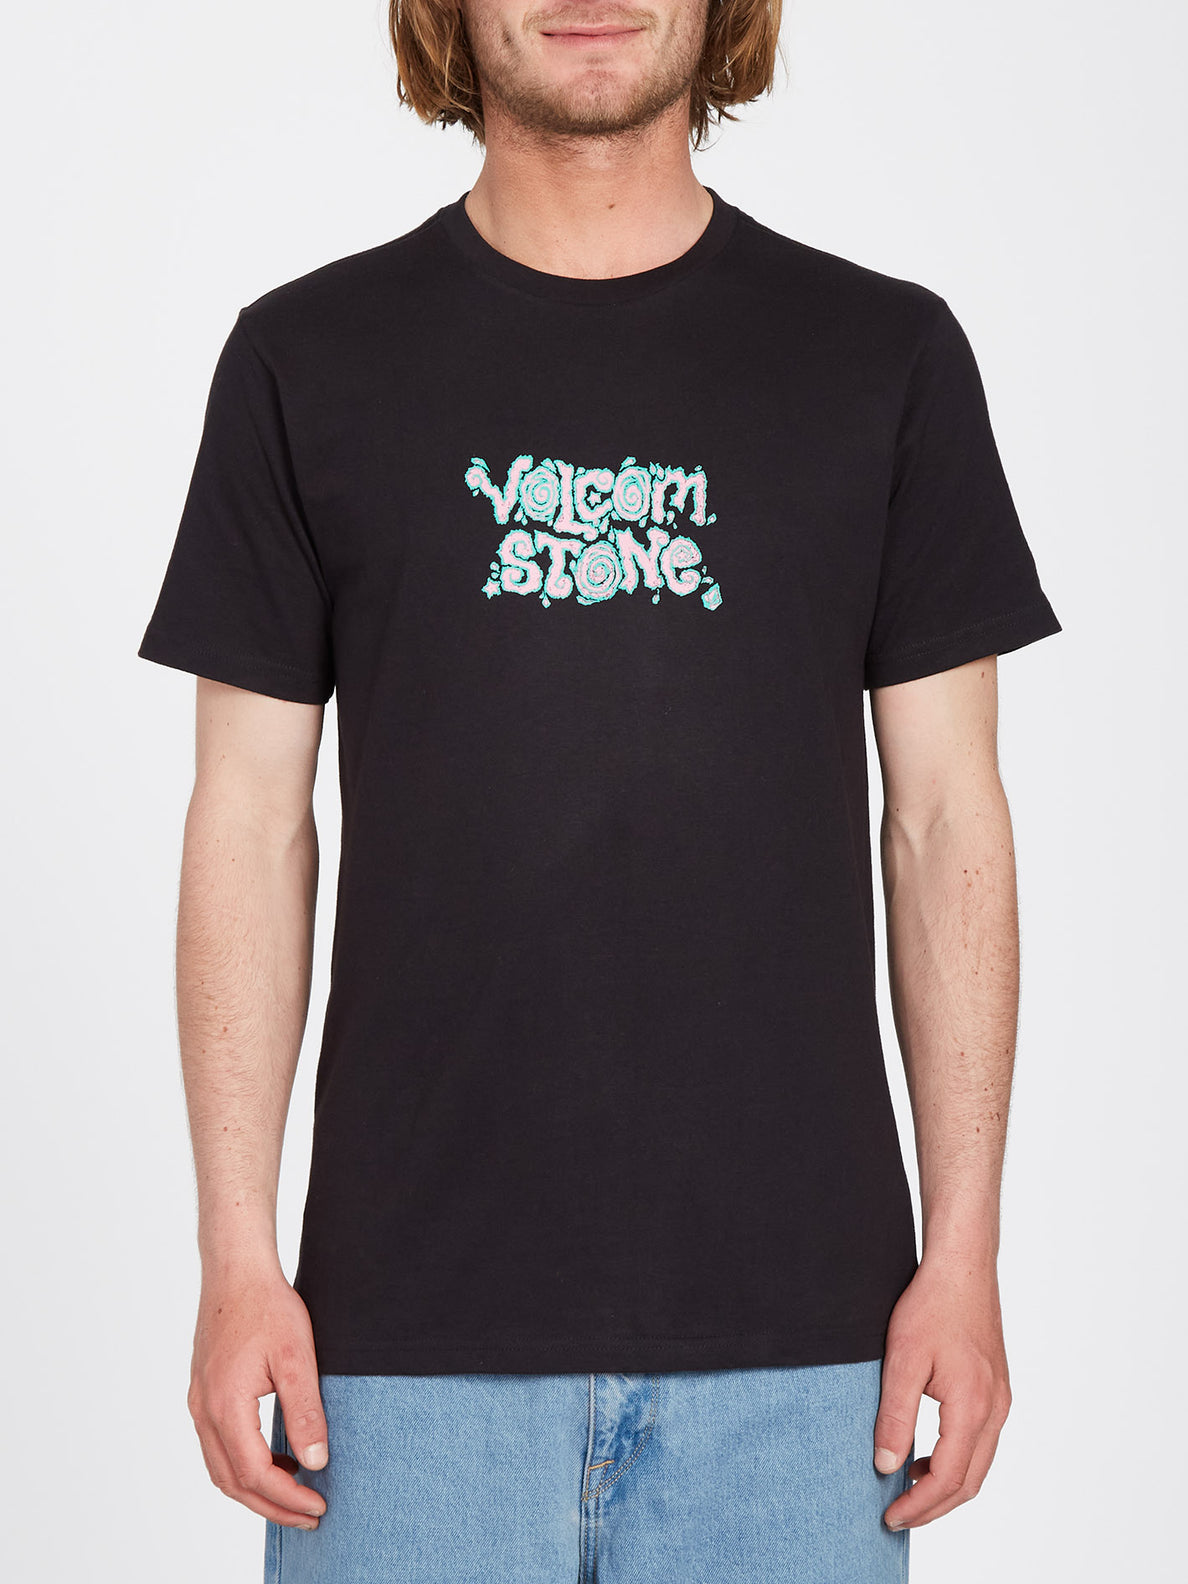 Justin Hager In Type T-shirt - BLACK (A3512323_BLK) [F]